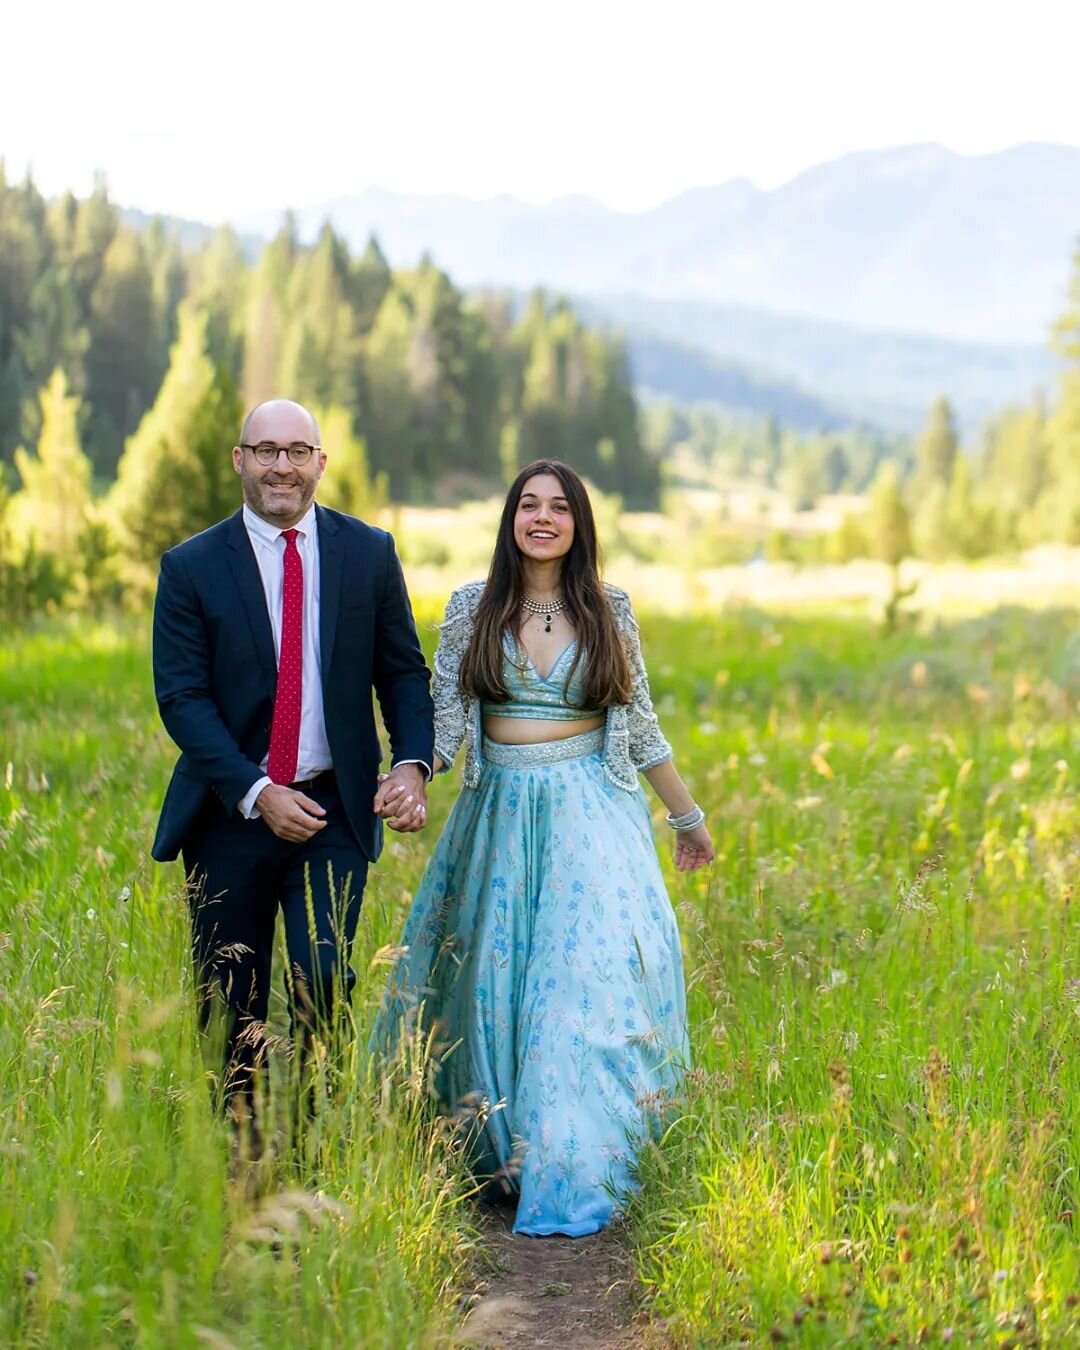 Eloping in Montana is just better than any other place. 

Whether you go to the courthouse and then take a walk in a beautiful meadow as these two did, or you hike up a mountain for your ceremony, Montana has the most amazing opportunities.

Dm me th